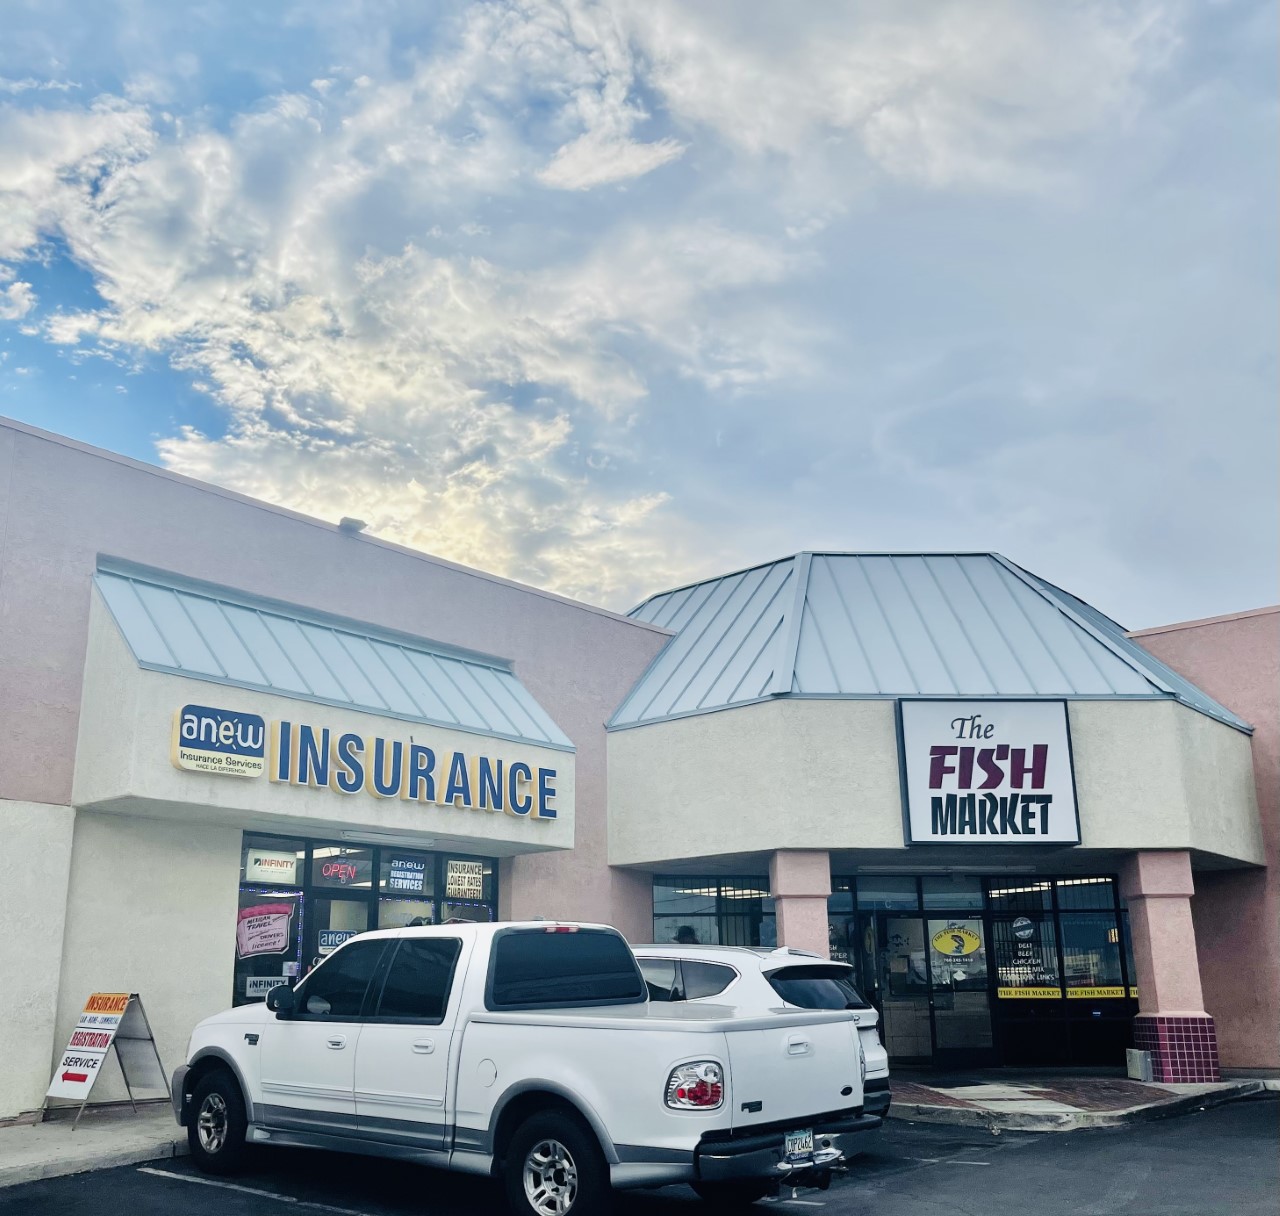 Anew Insurance Services